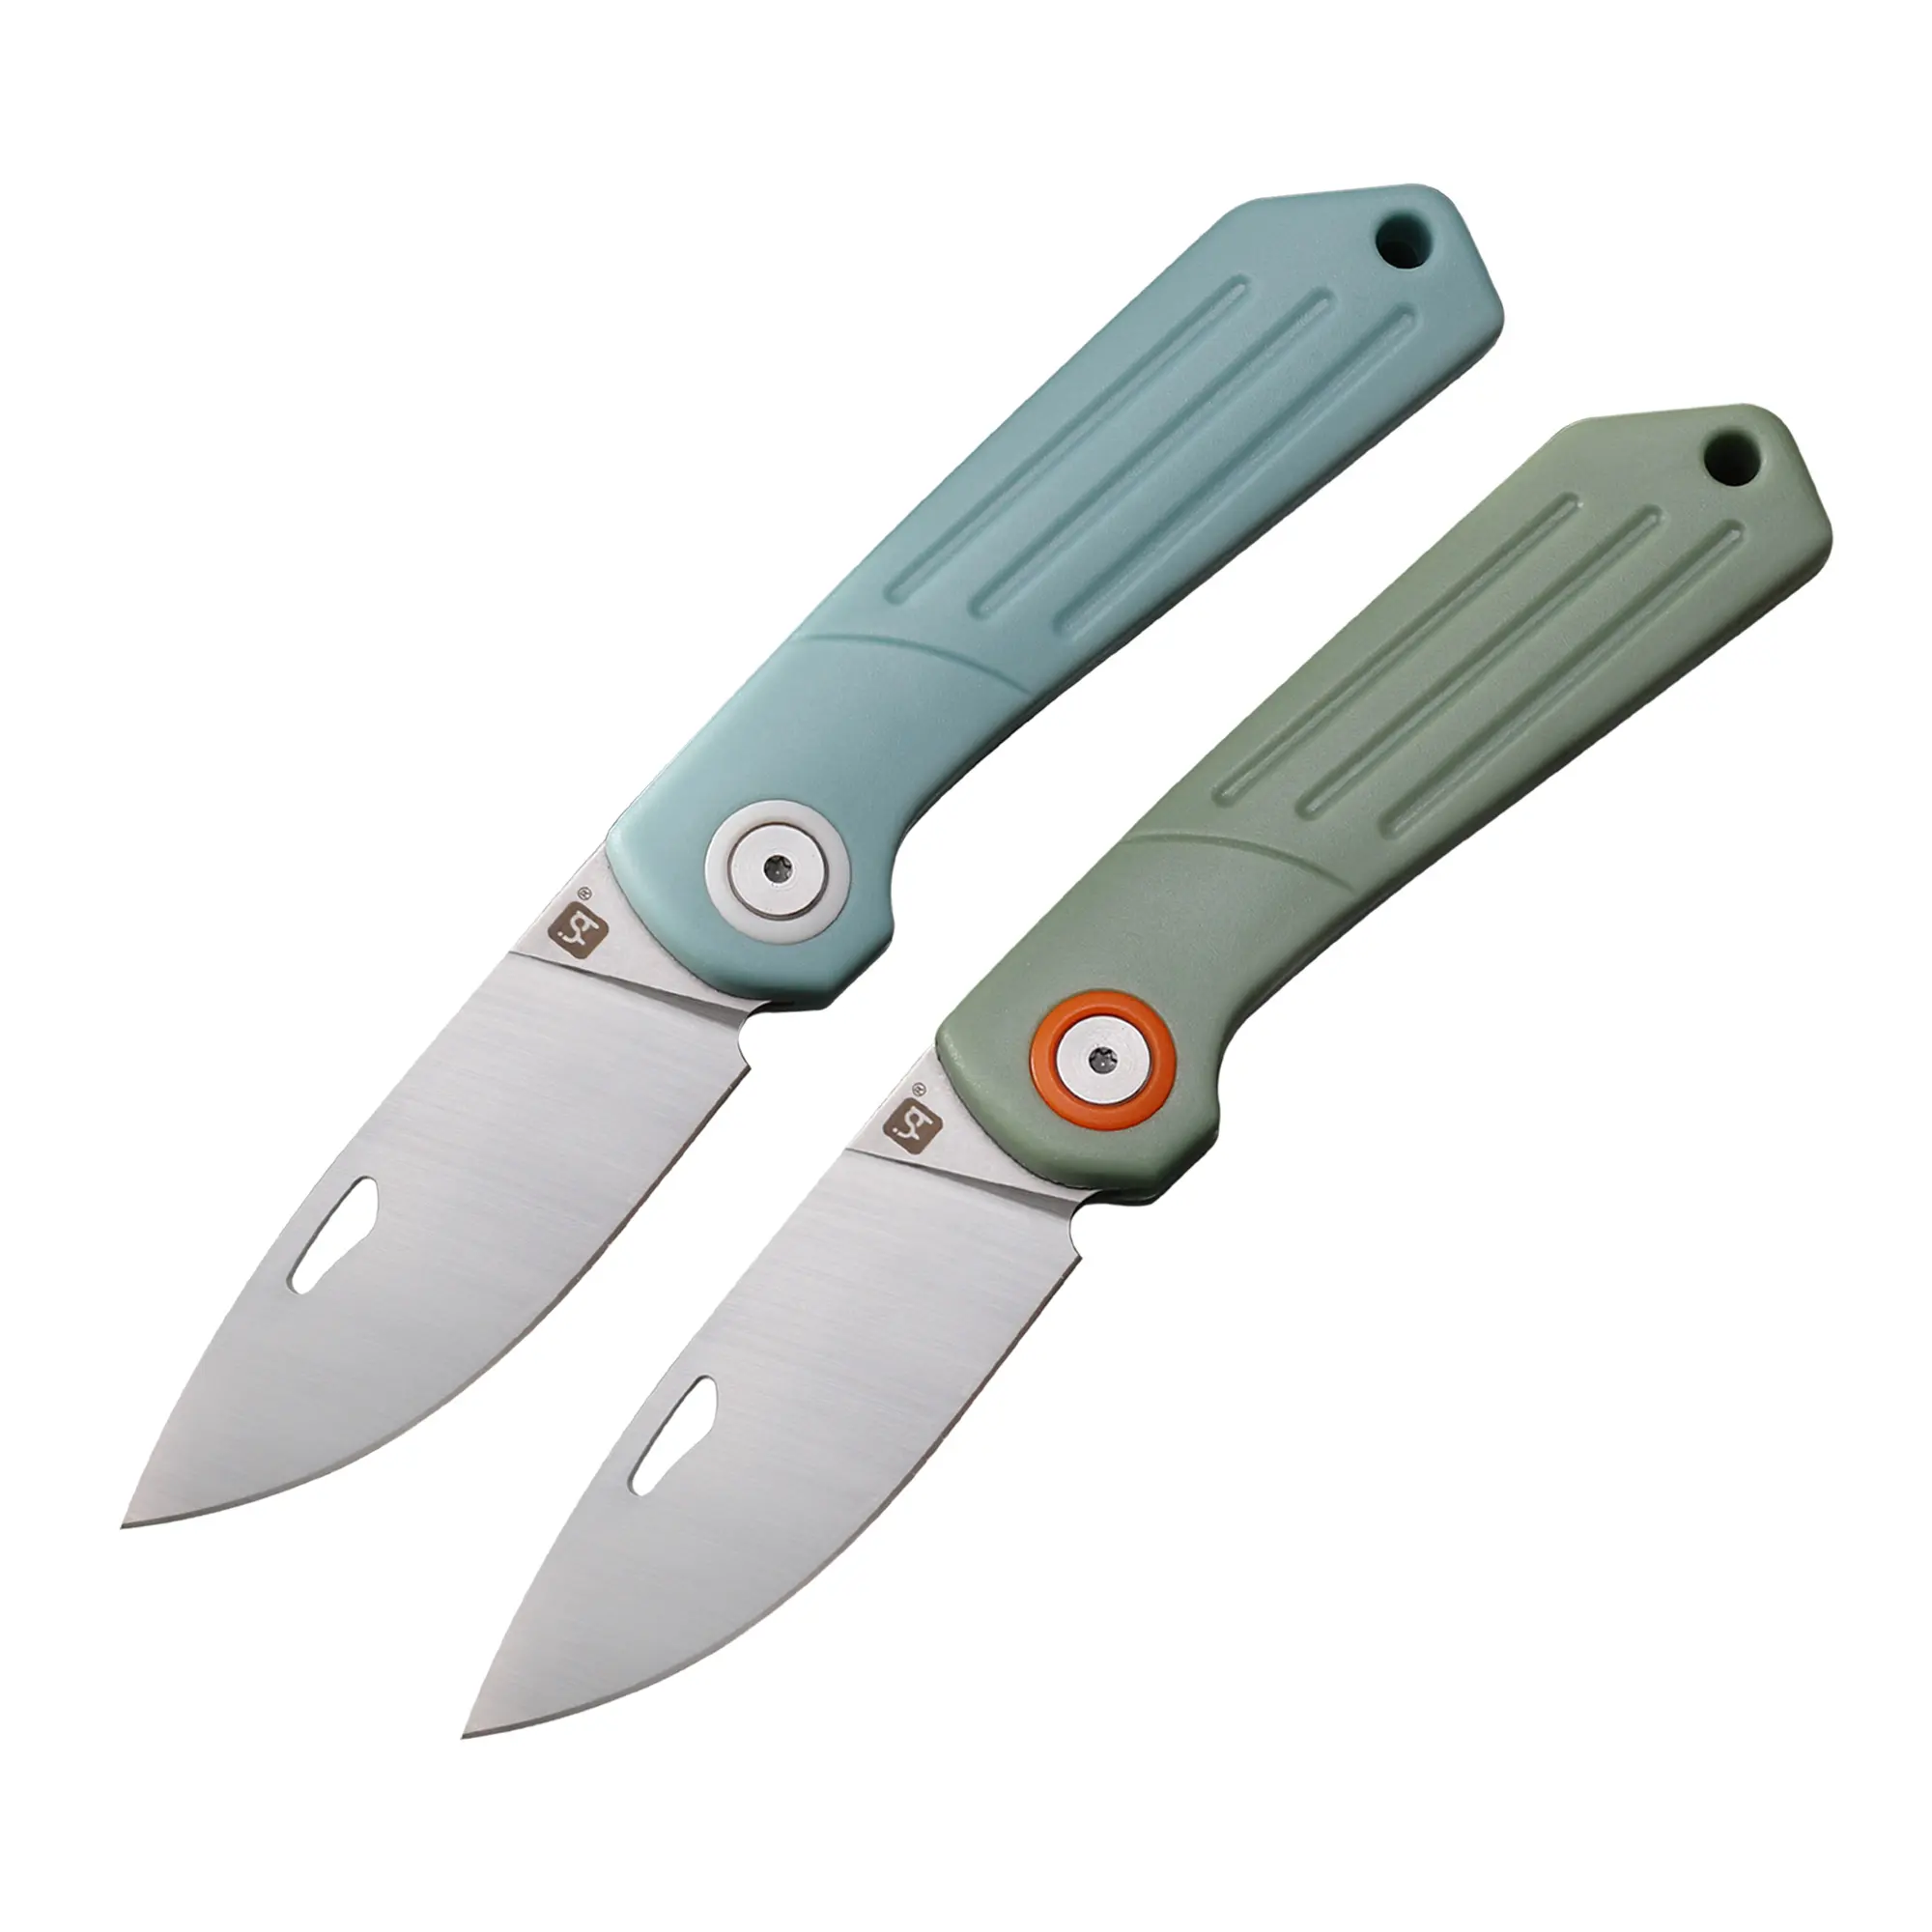 Factory Outlet New Design 5Cr15MoV Stainless Steel Folding Fruit Knife ABS Handle Household Folding Knife